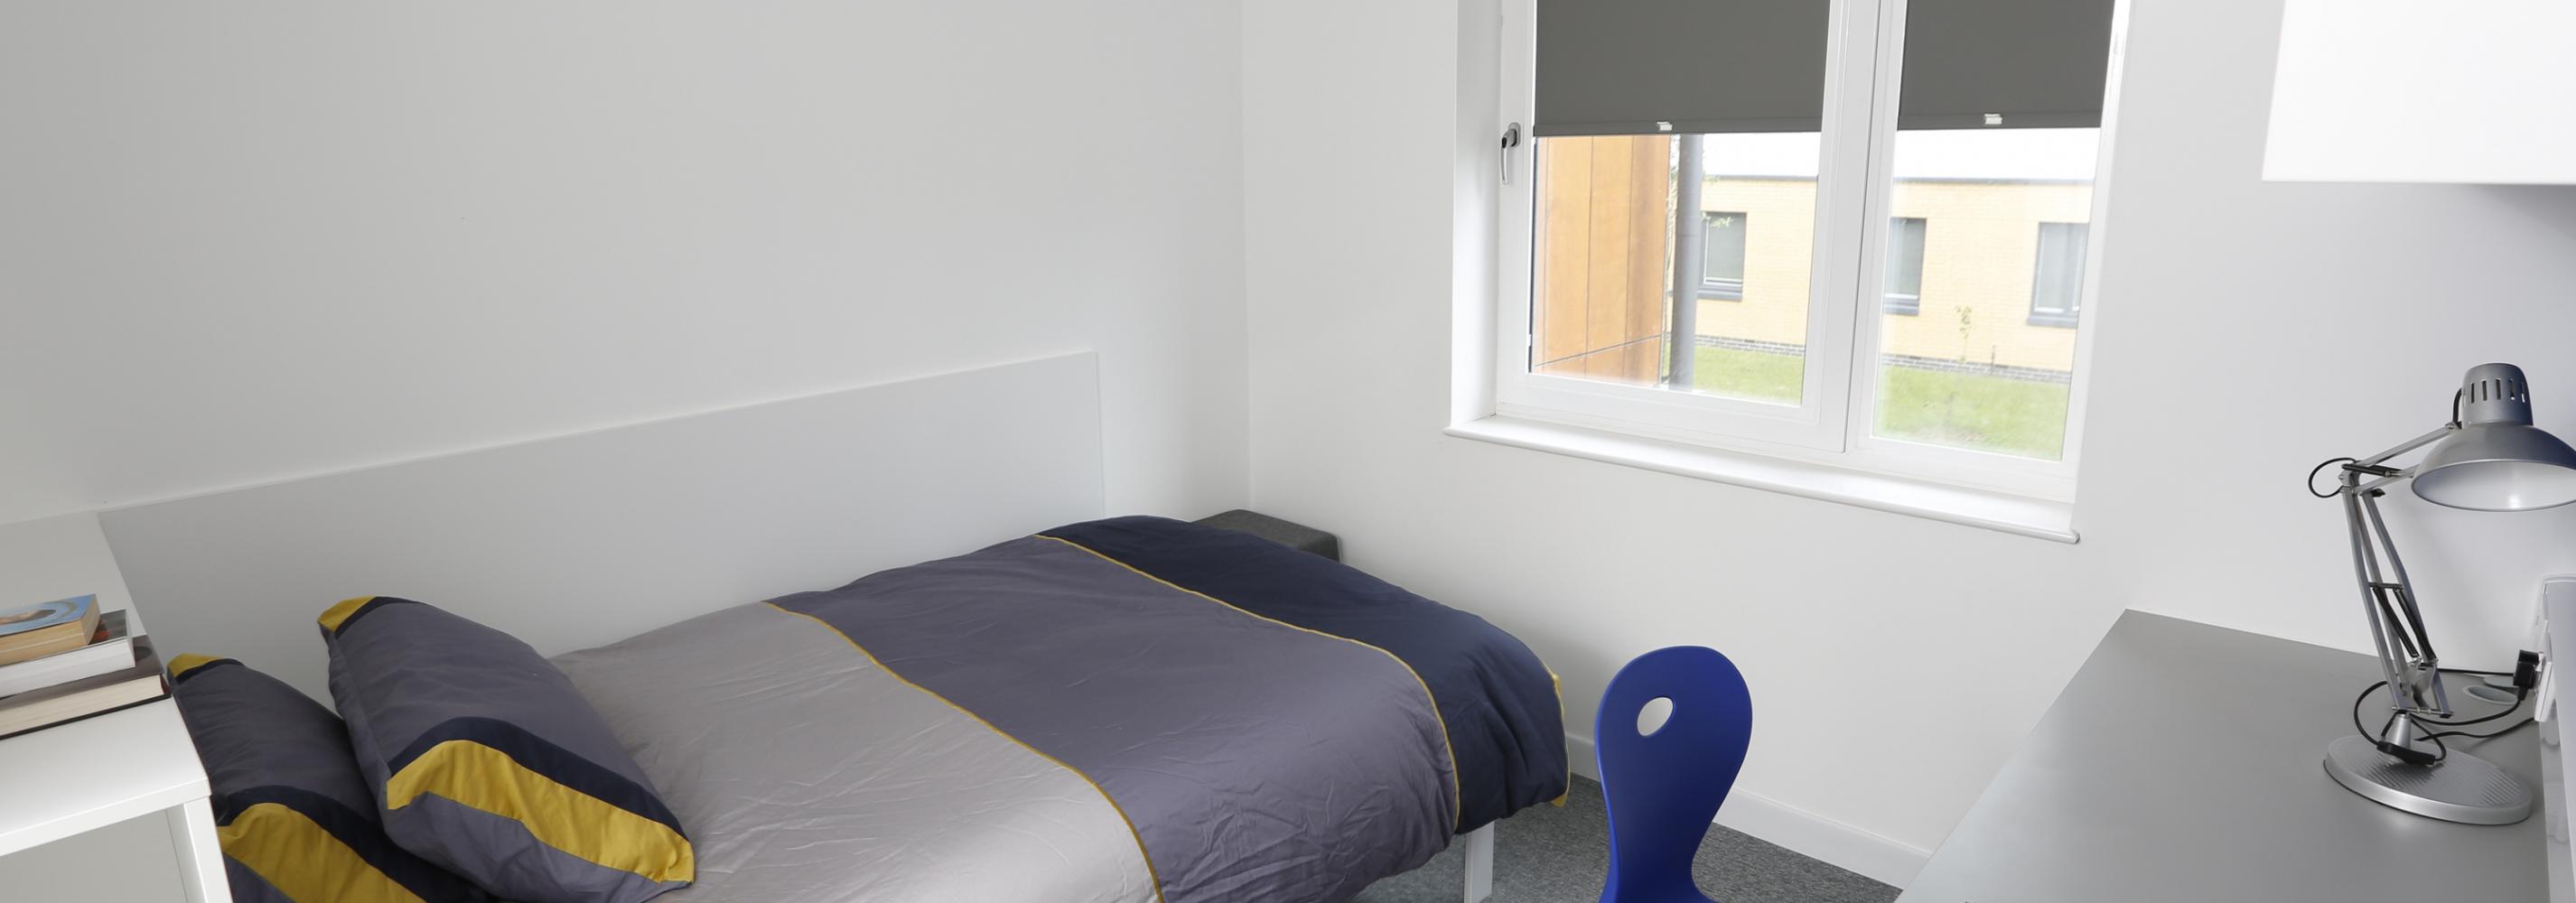 Interior shot of enhanced ensuite room, with a small double bed, wardrobe, work desk and swivel chair